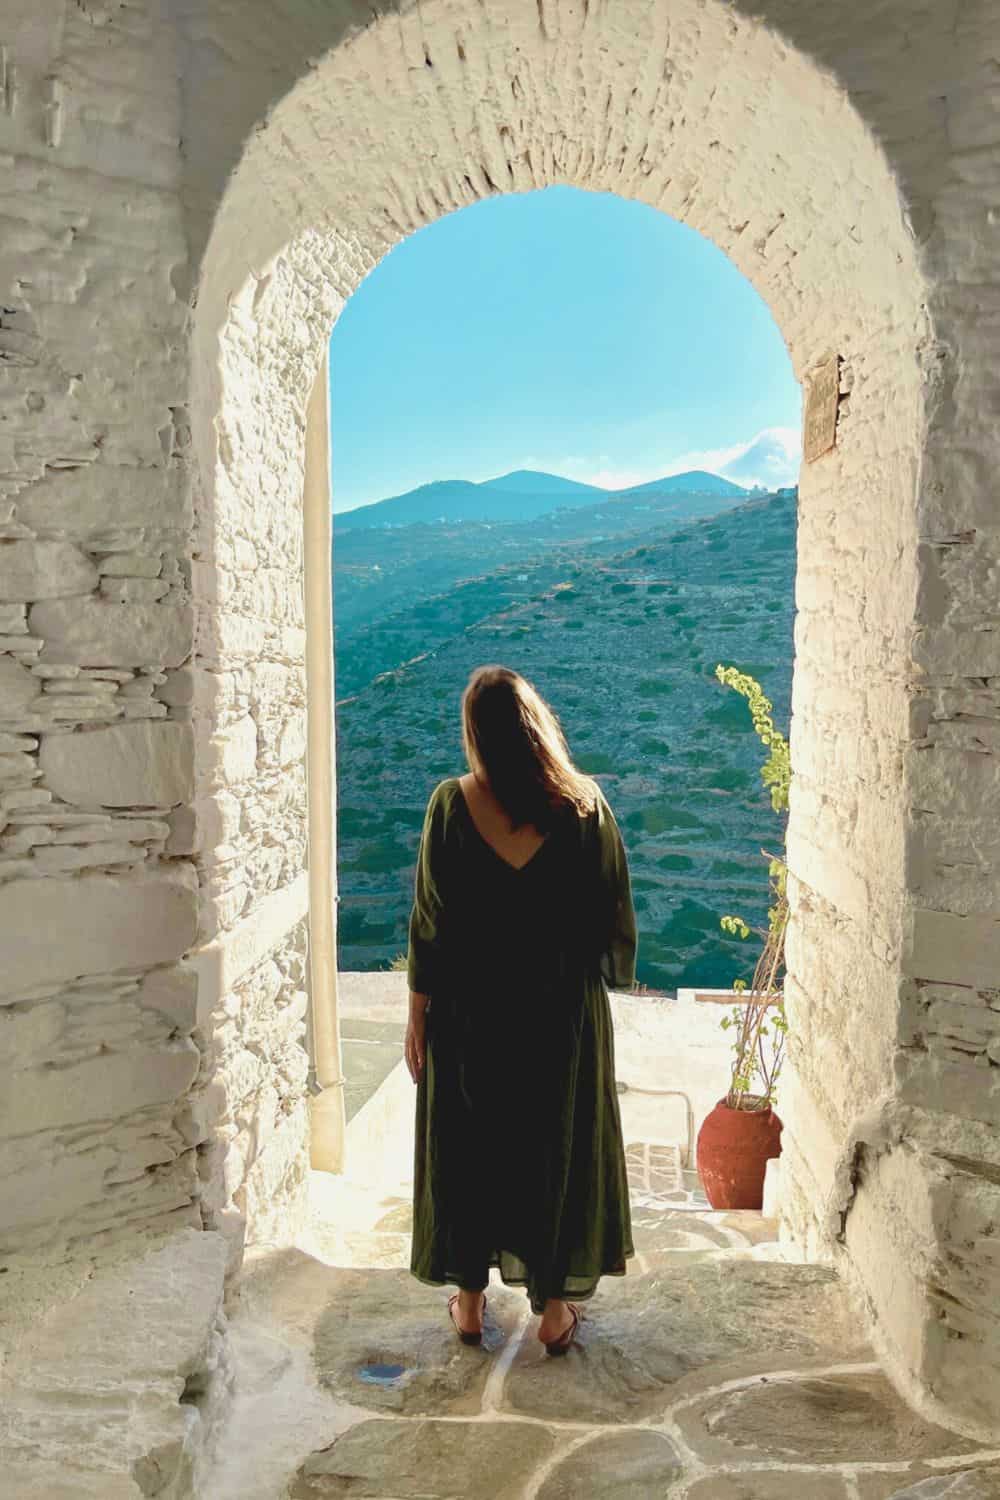 A woman stands in the shadow of an arched stone doorway, gazing out at the expansive landscape of Sifnos. The horizon is dotted with gentle hills under a clear blue sky, and the moment captures a sense of peaceful contemplation.